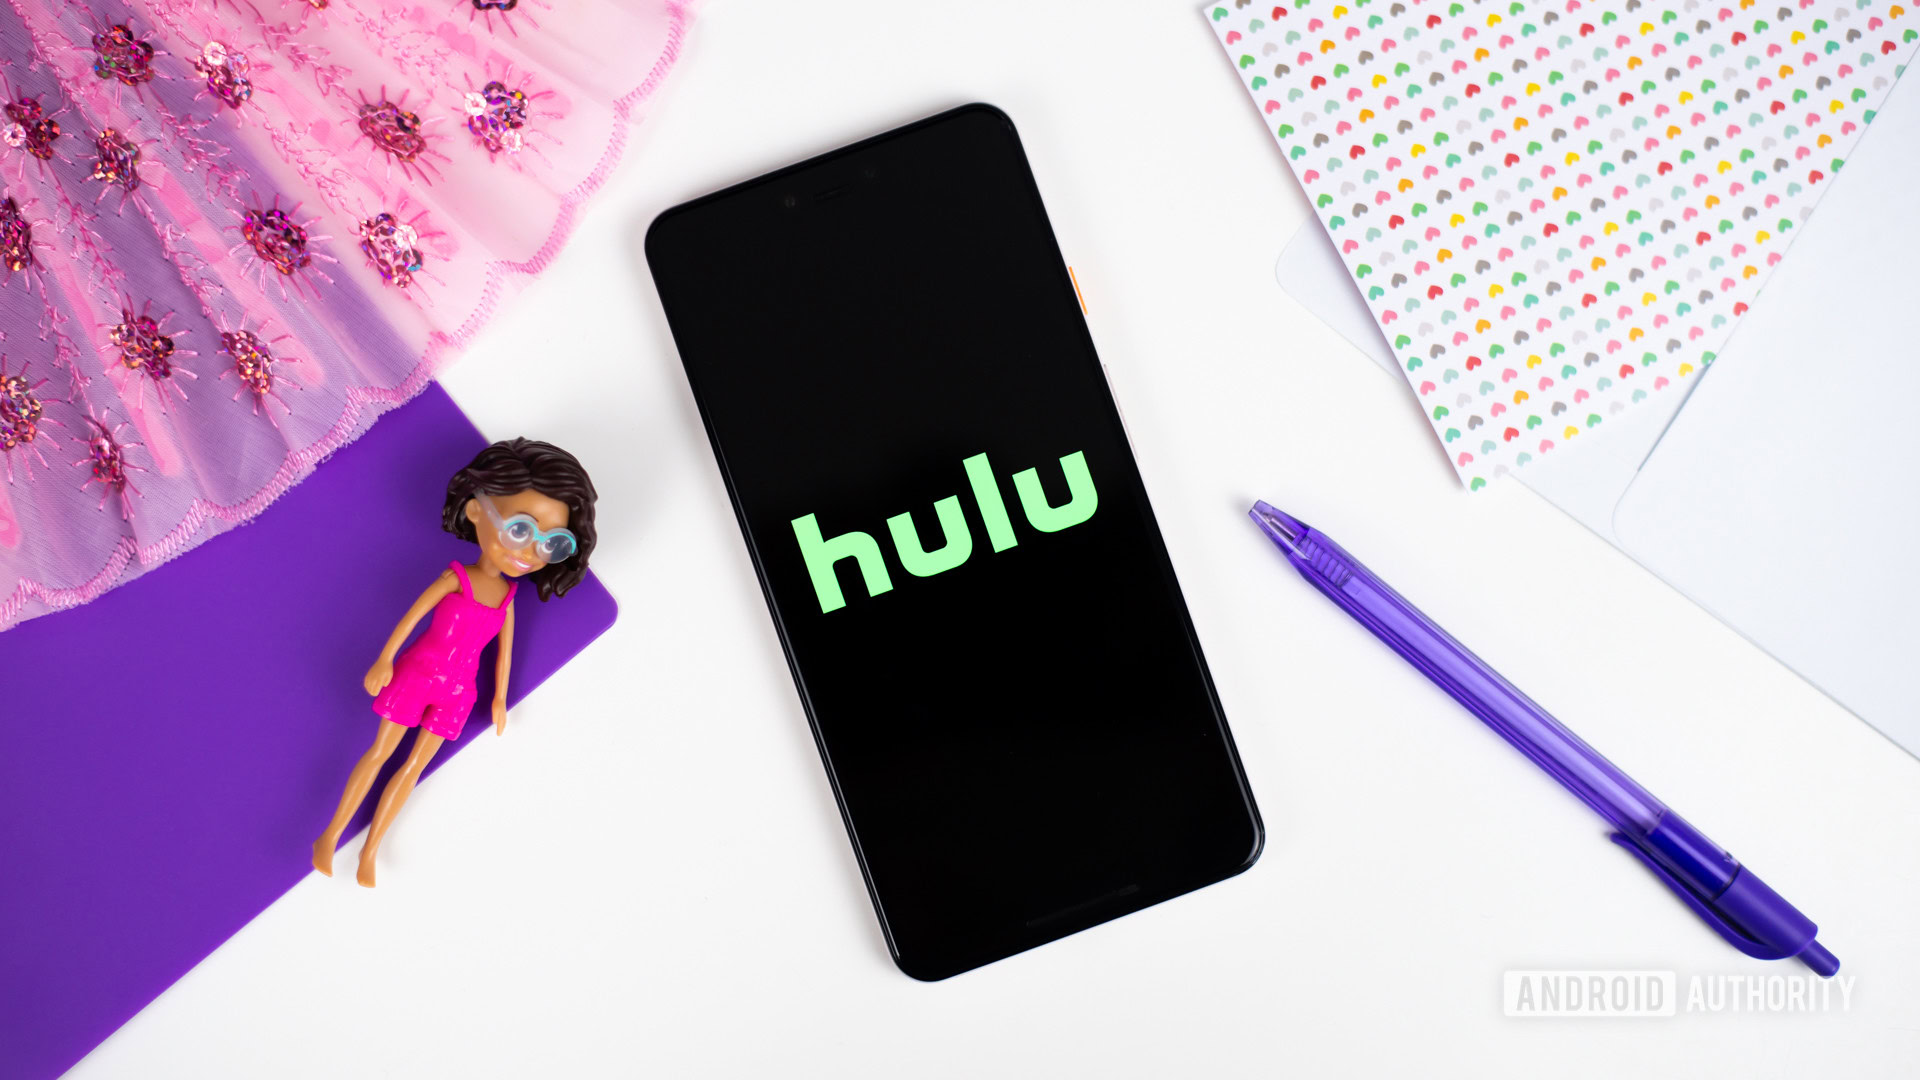 cant download hulu app to my xoom